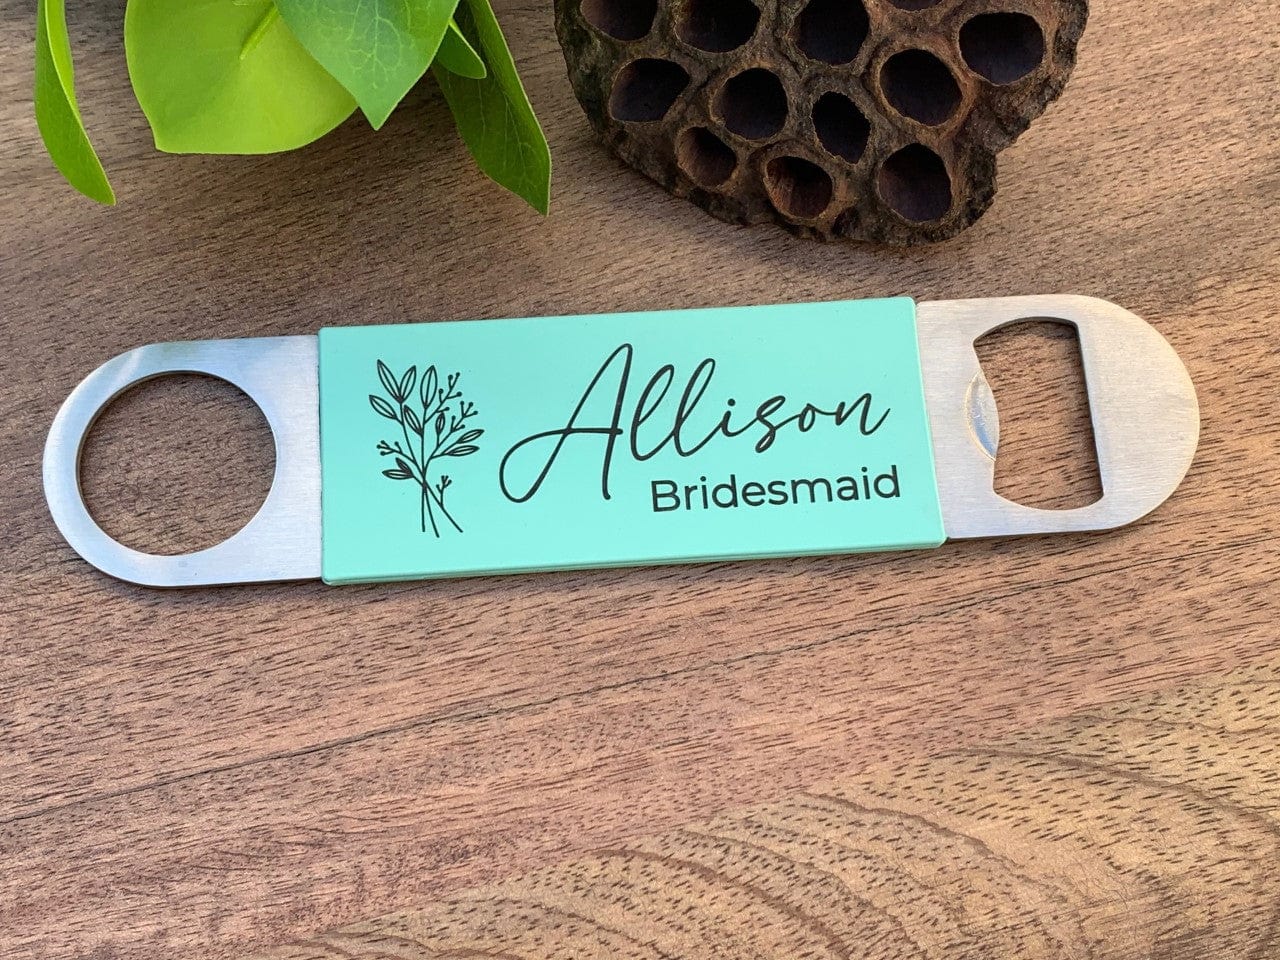 Bridesmaid Bottle Opener Engraved With Name and Title | Wedding Party Favor